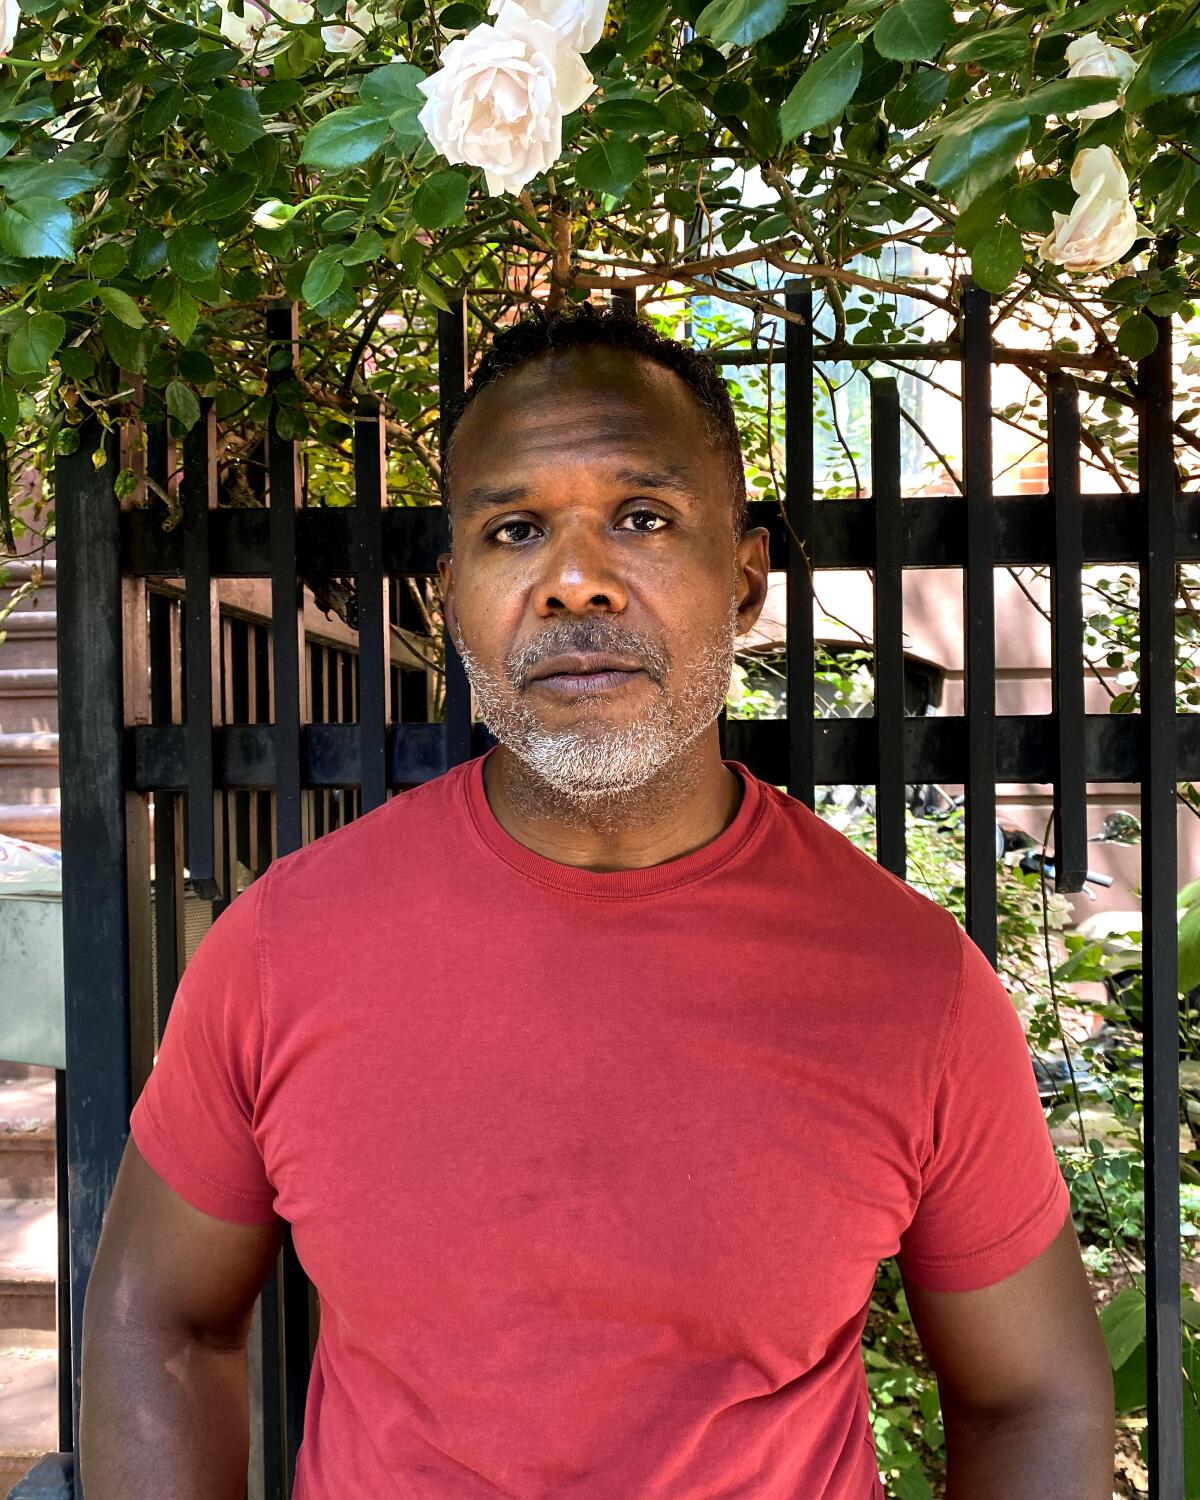 A man in a red T-shirt stands outside, a fenced-in garden behind him.